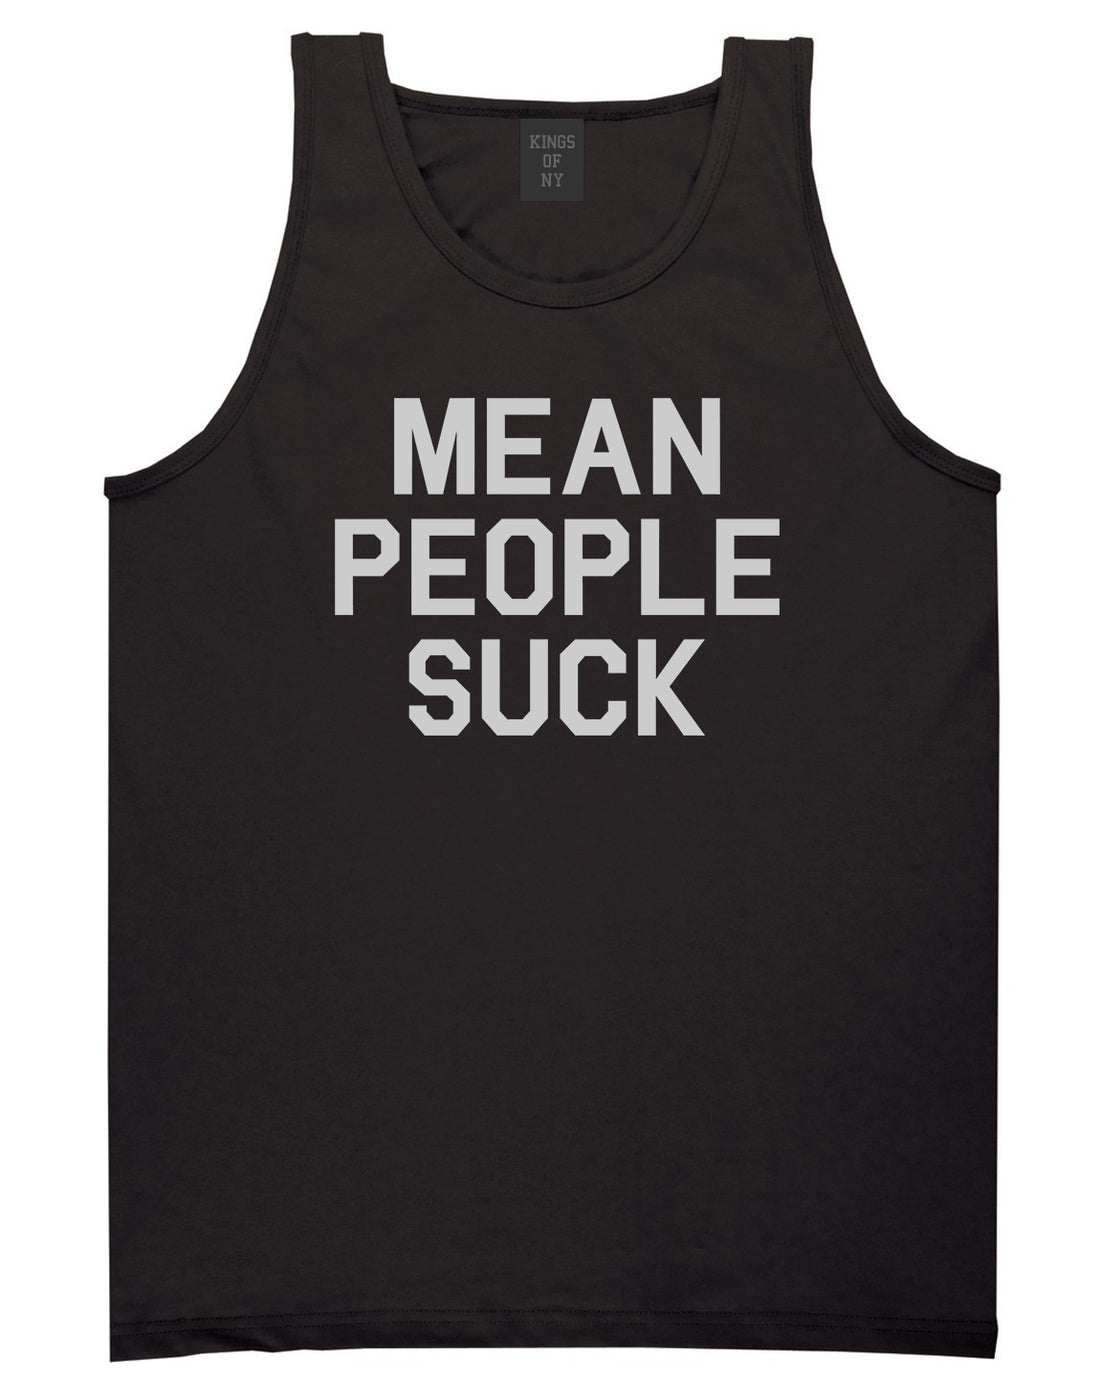 Mean People Suck Mens Tank Top Shirt Black by Kings Of NY